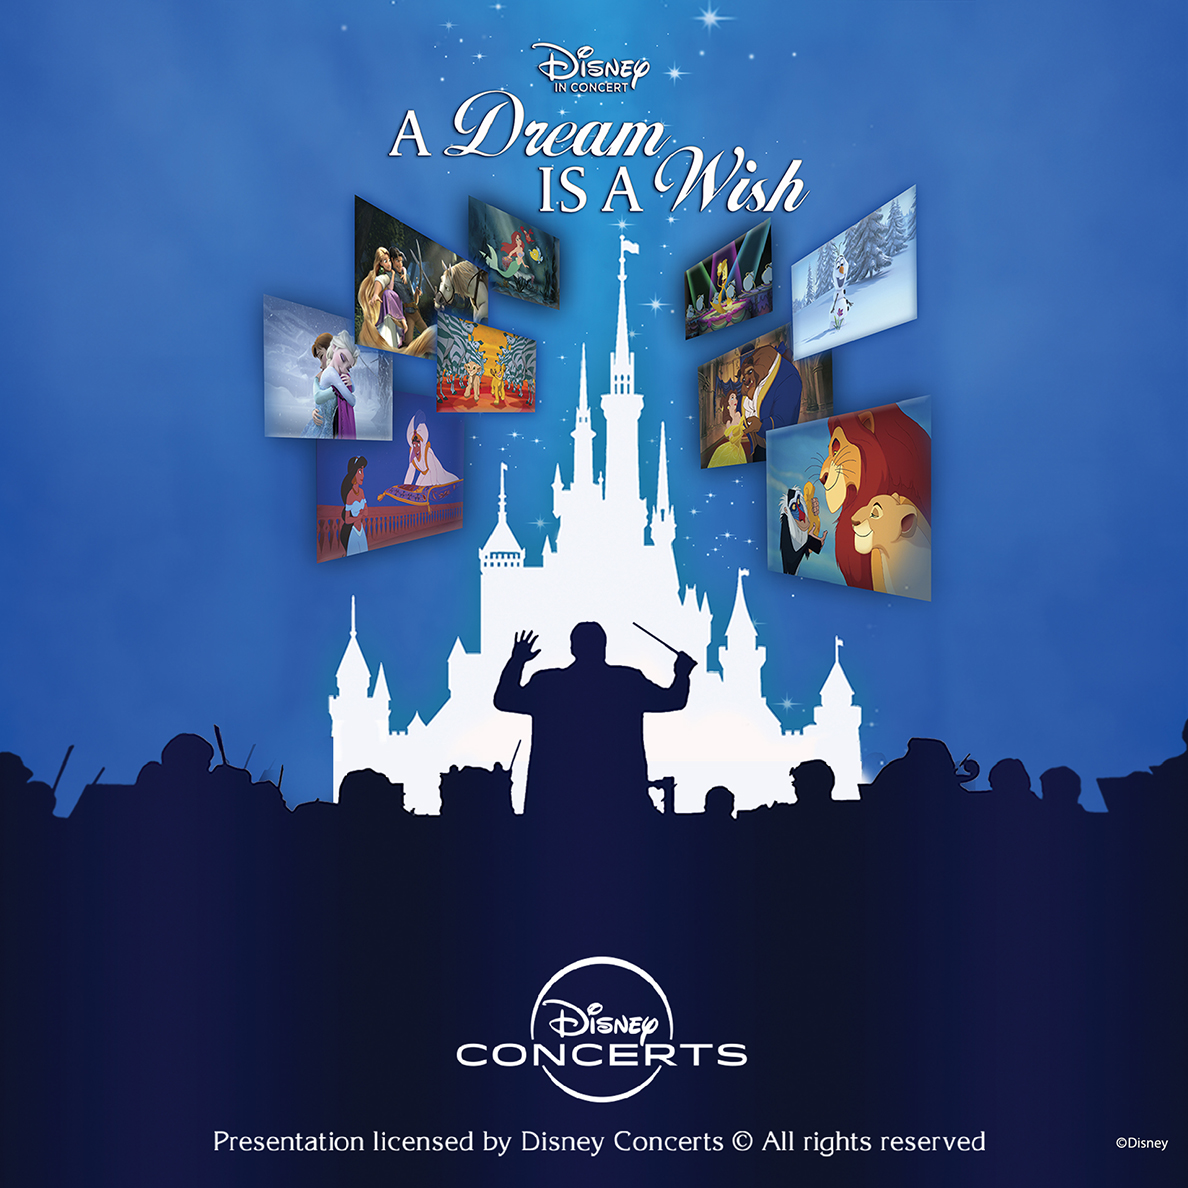 DISNEY IN CONCERT A Dream is a Wish